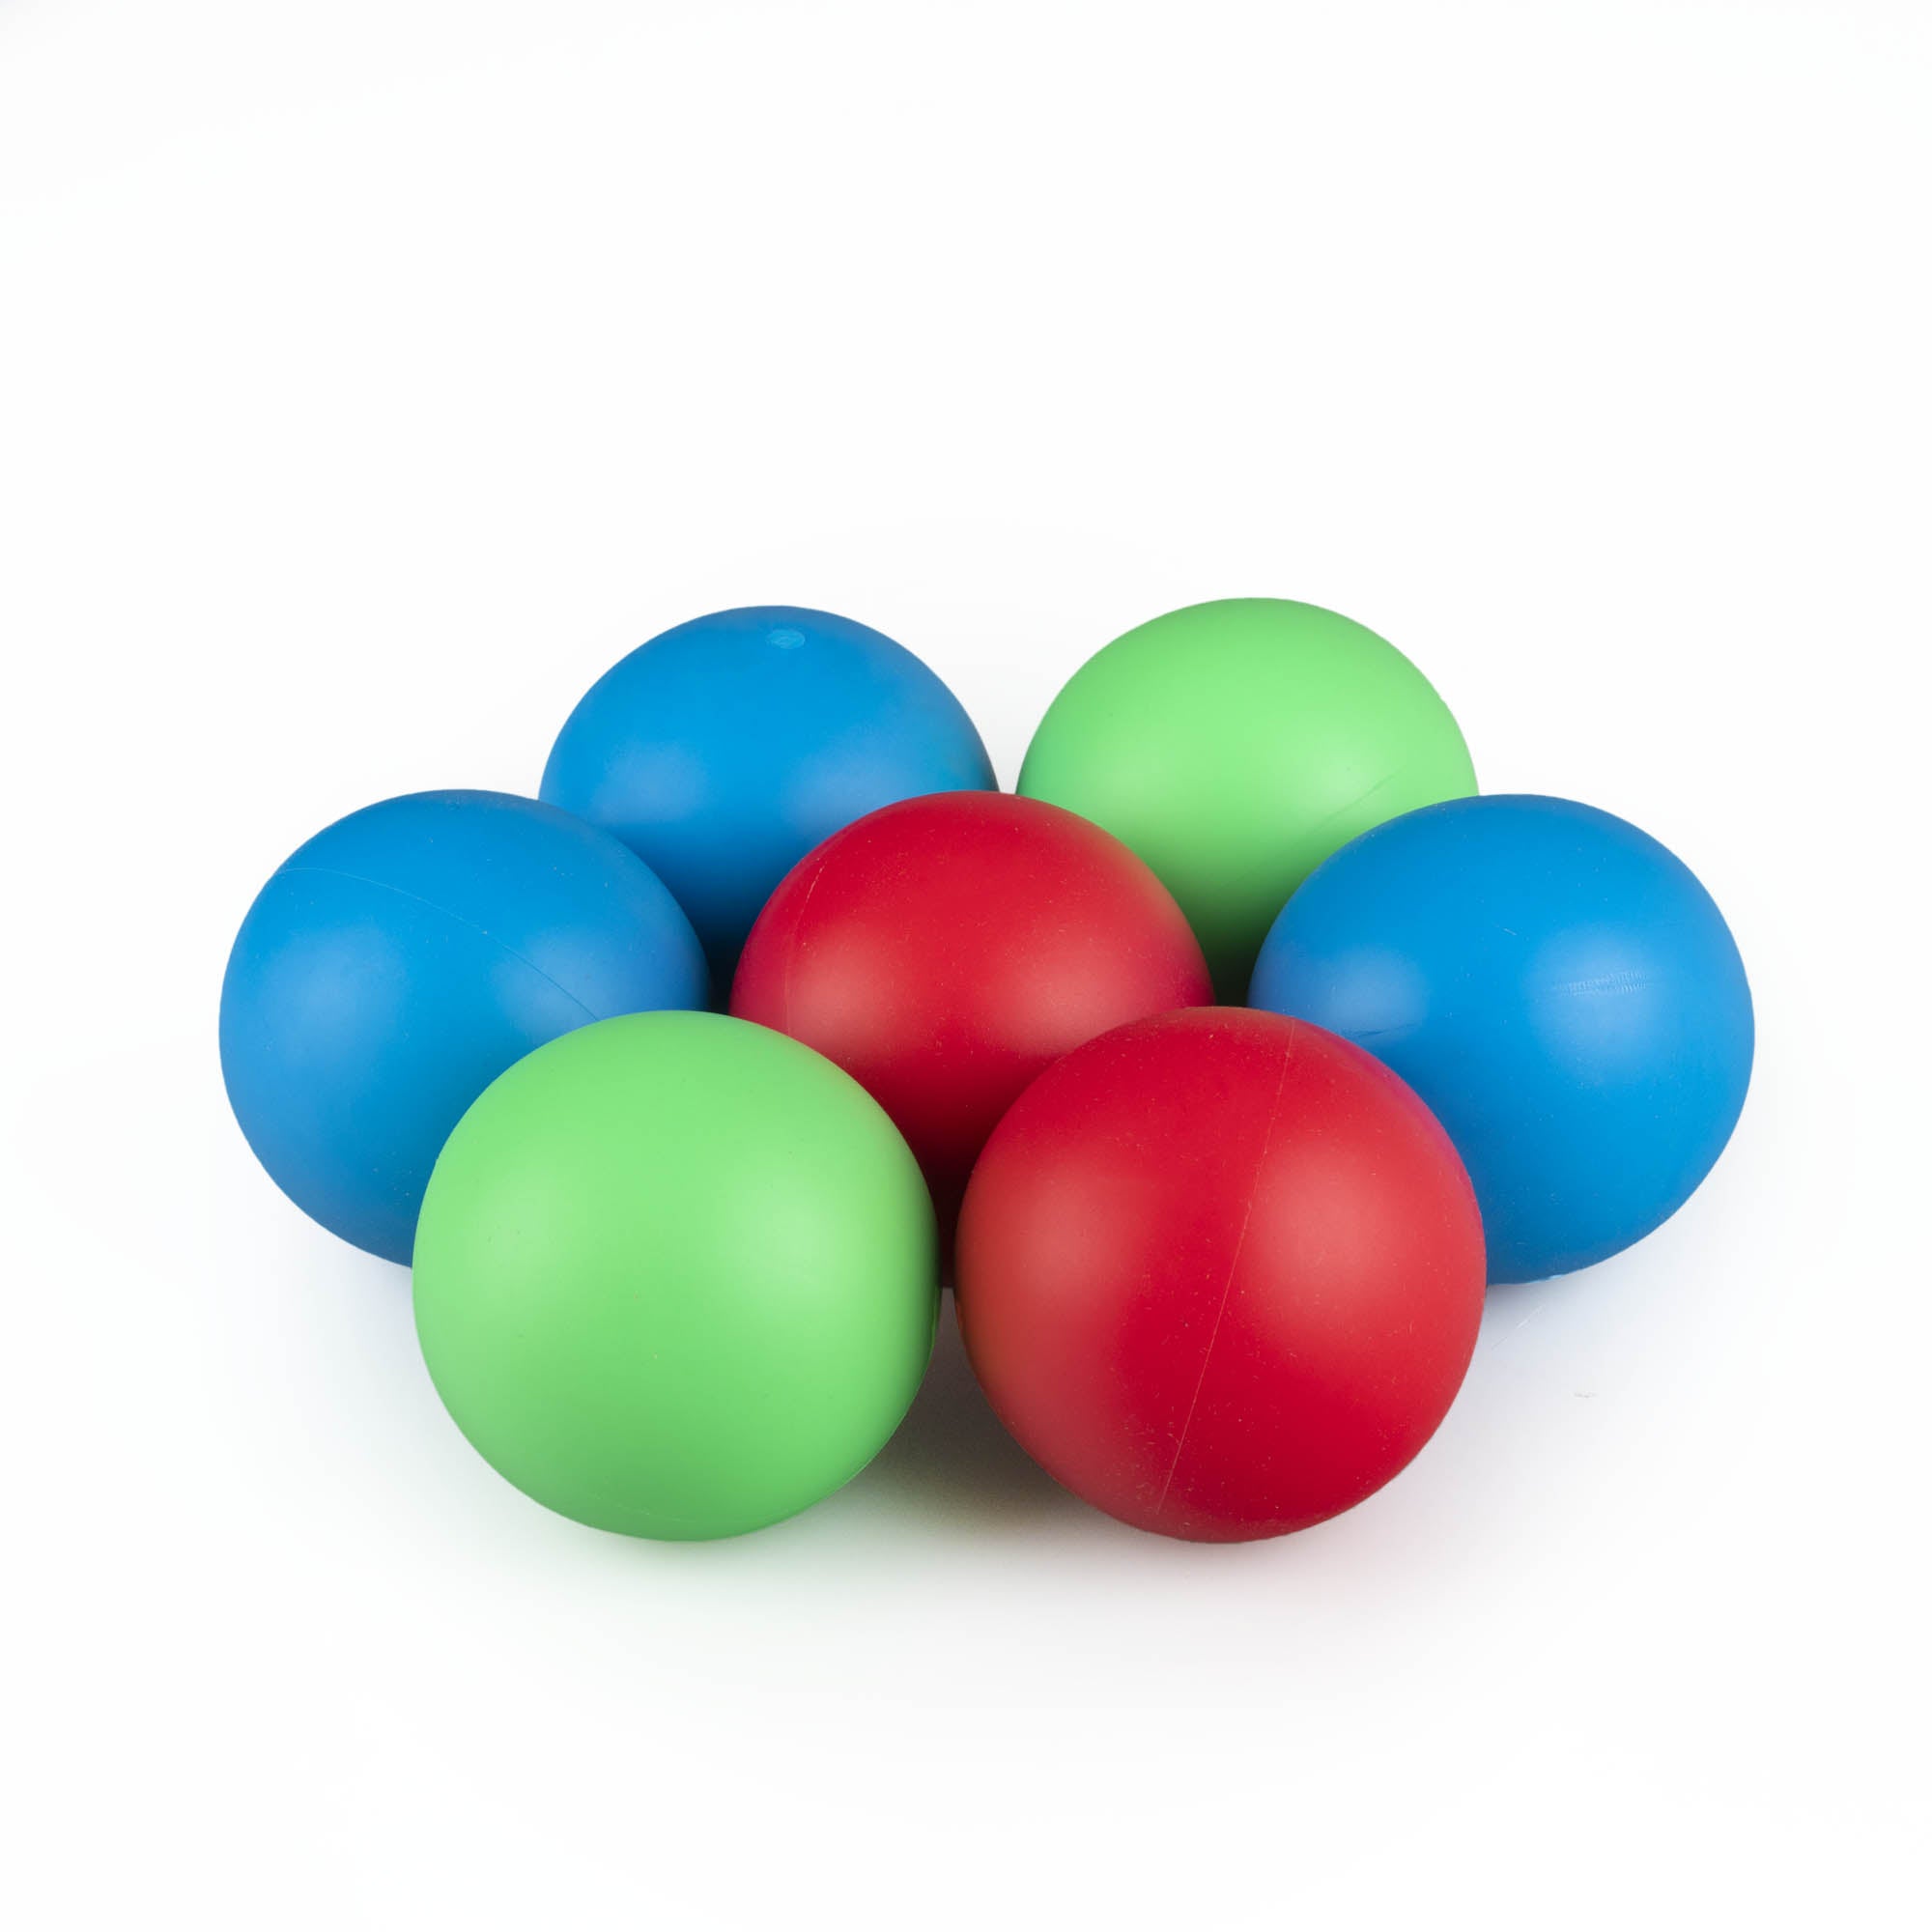 MMX 70mm juggling balls group shot all colours